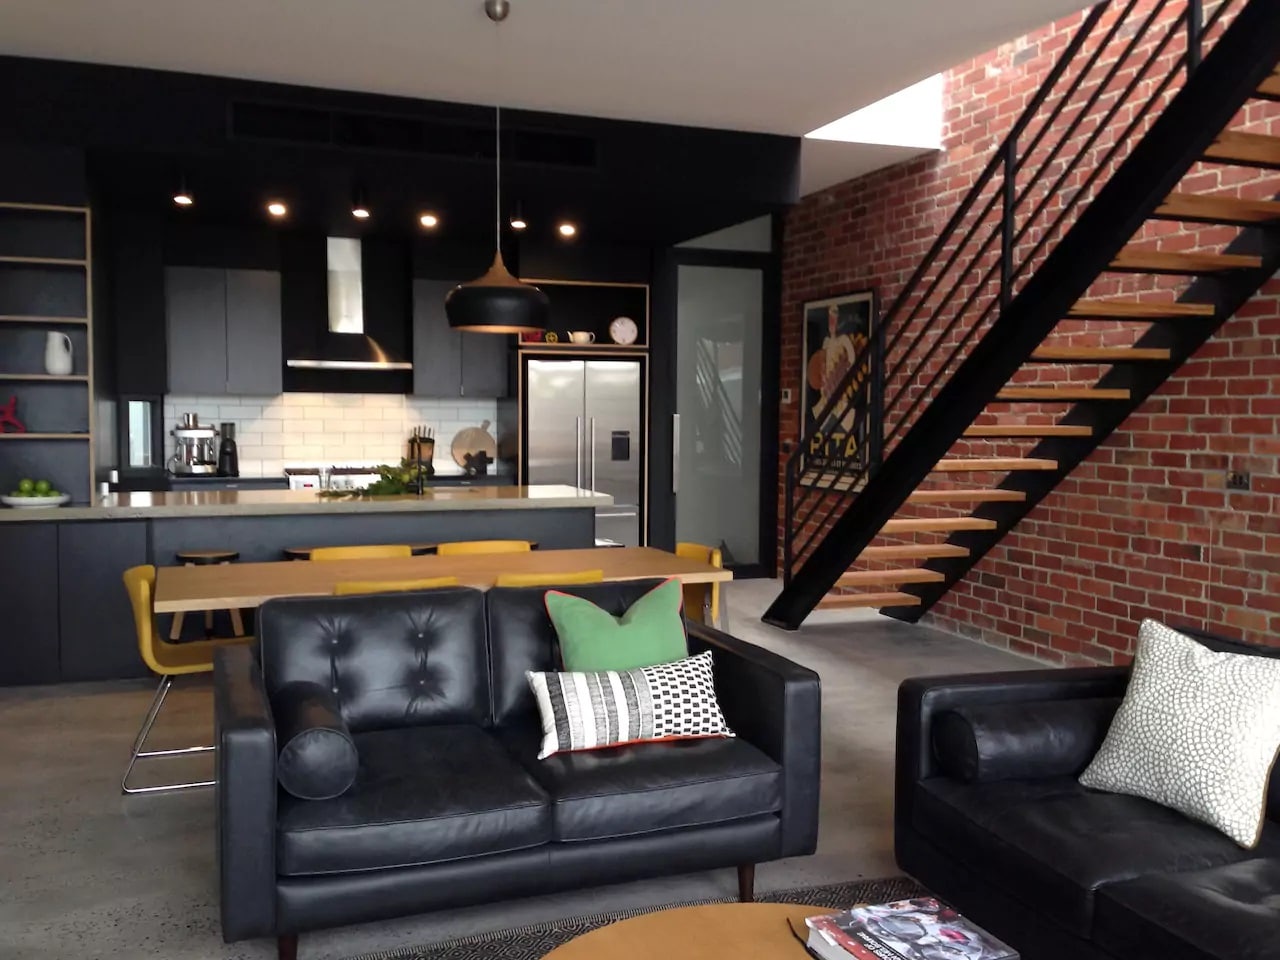 melbourne airbnb drawing dining kitchen and stair view